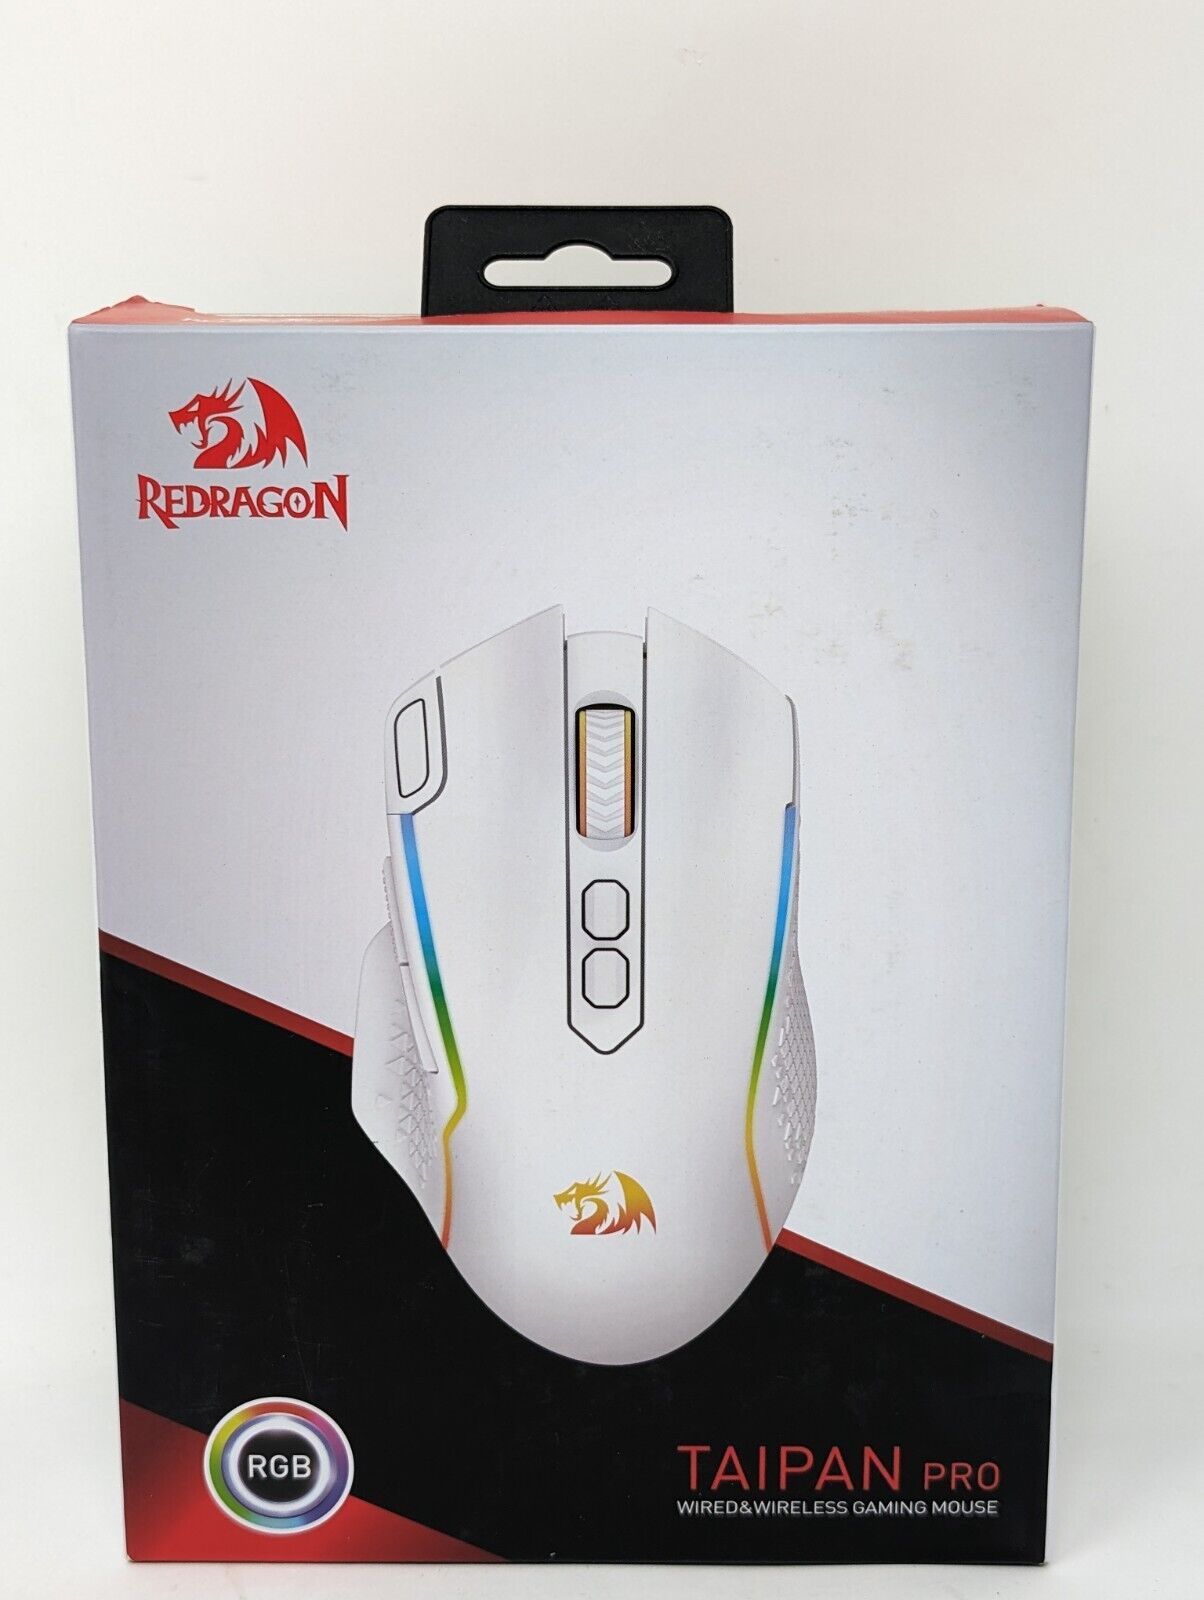 RED DRAGON TAIPAN PRO M810W Wired And Wireless Gaming Mouse White - NEW